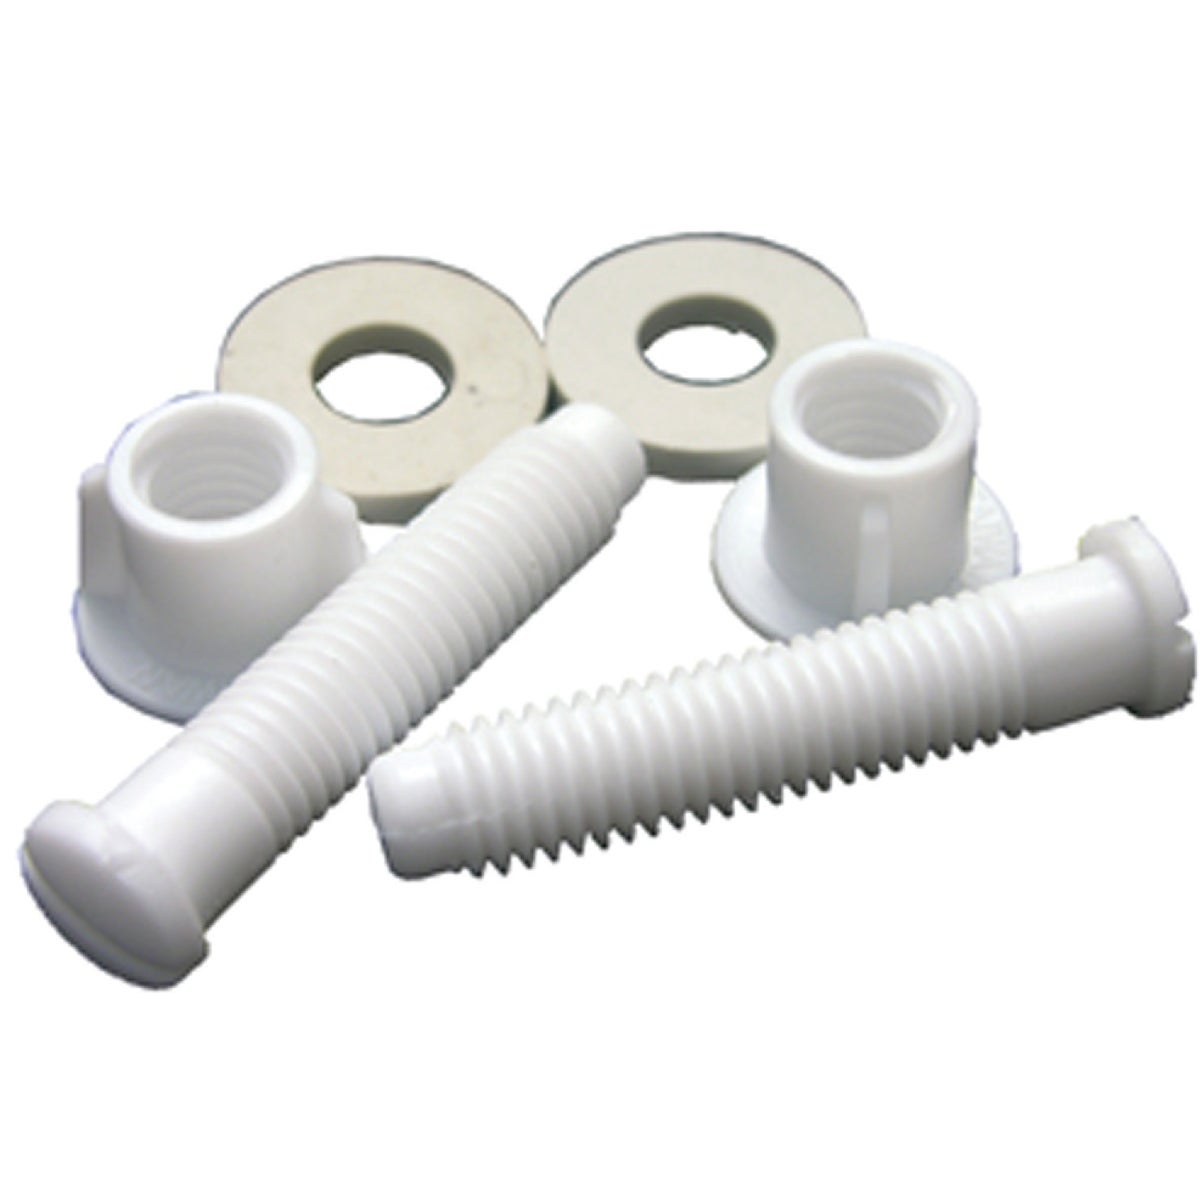 Lasco 7/17" x 2-1/8" White Plastic Toilet Seat Bolt, Includes Nuts and Washers